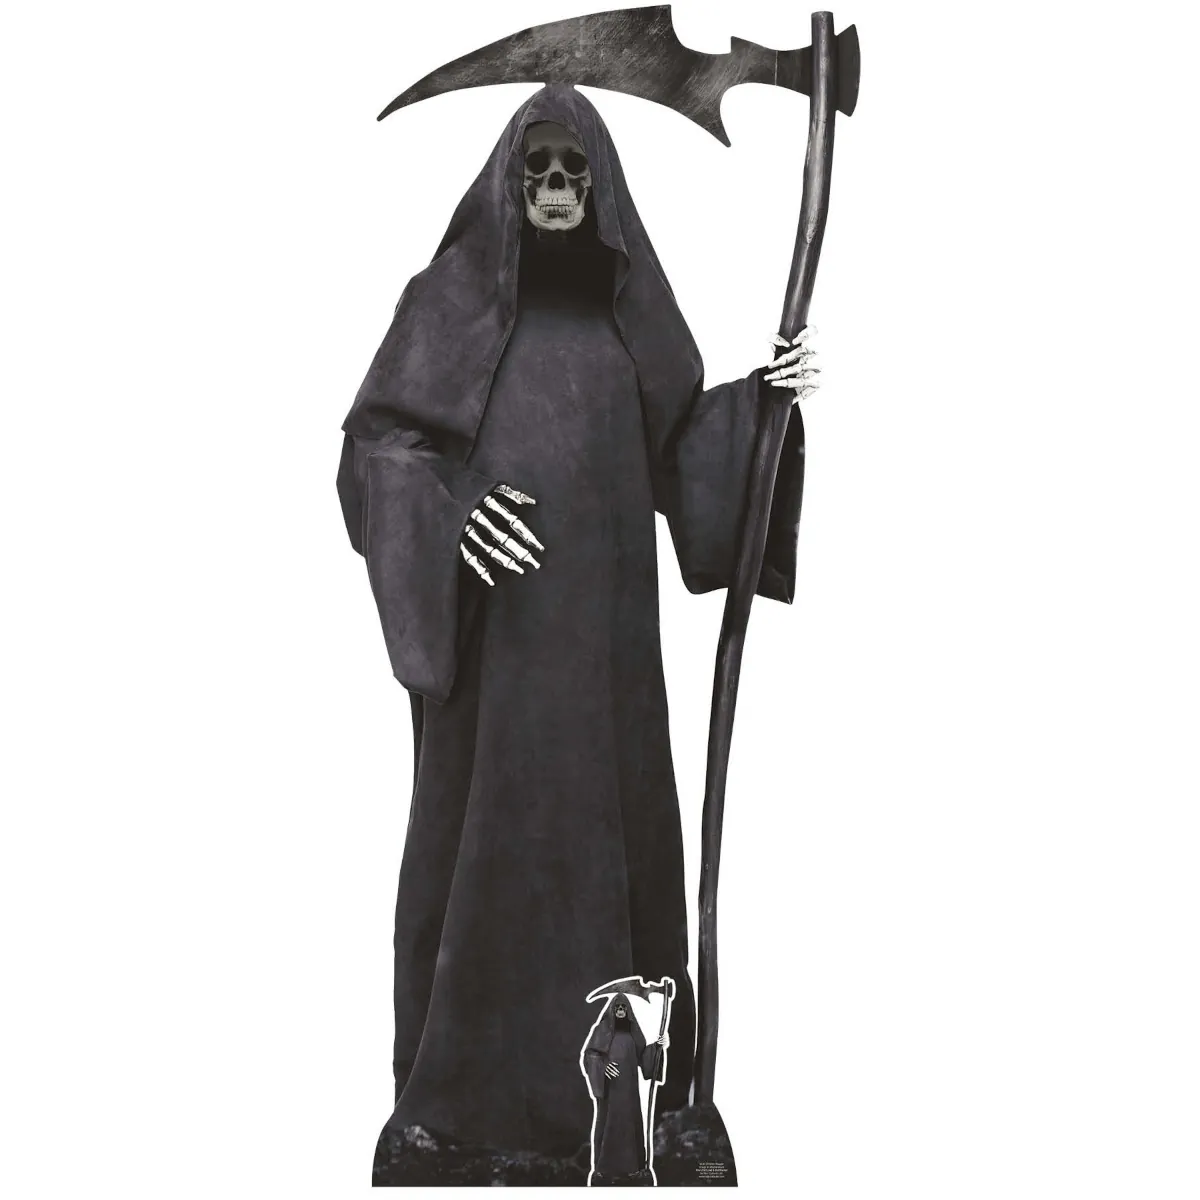 SC4120 Grim Reaper (Mythological Character) Lifesize + Mini Cardboard Cutout Standee Front